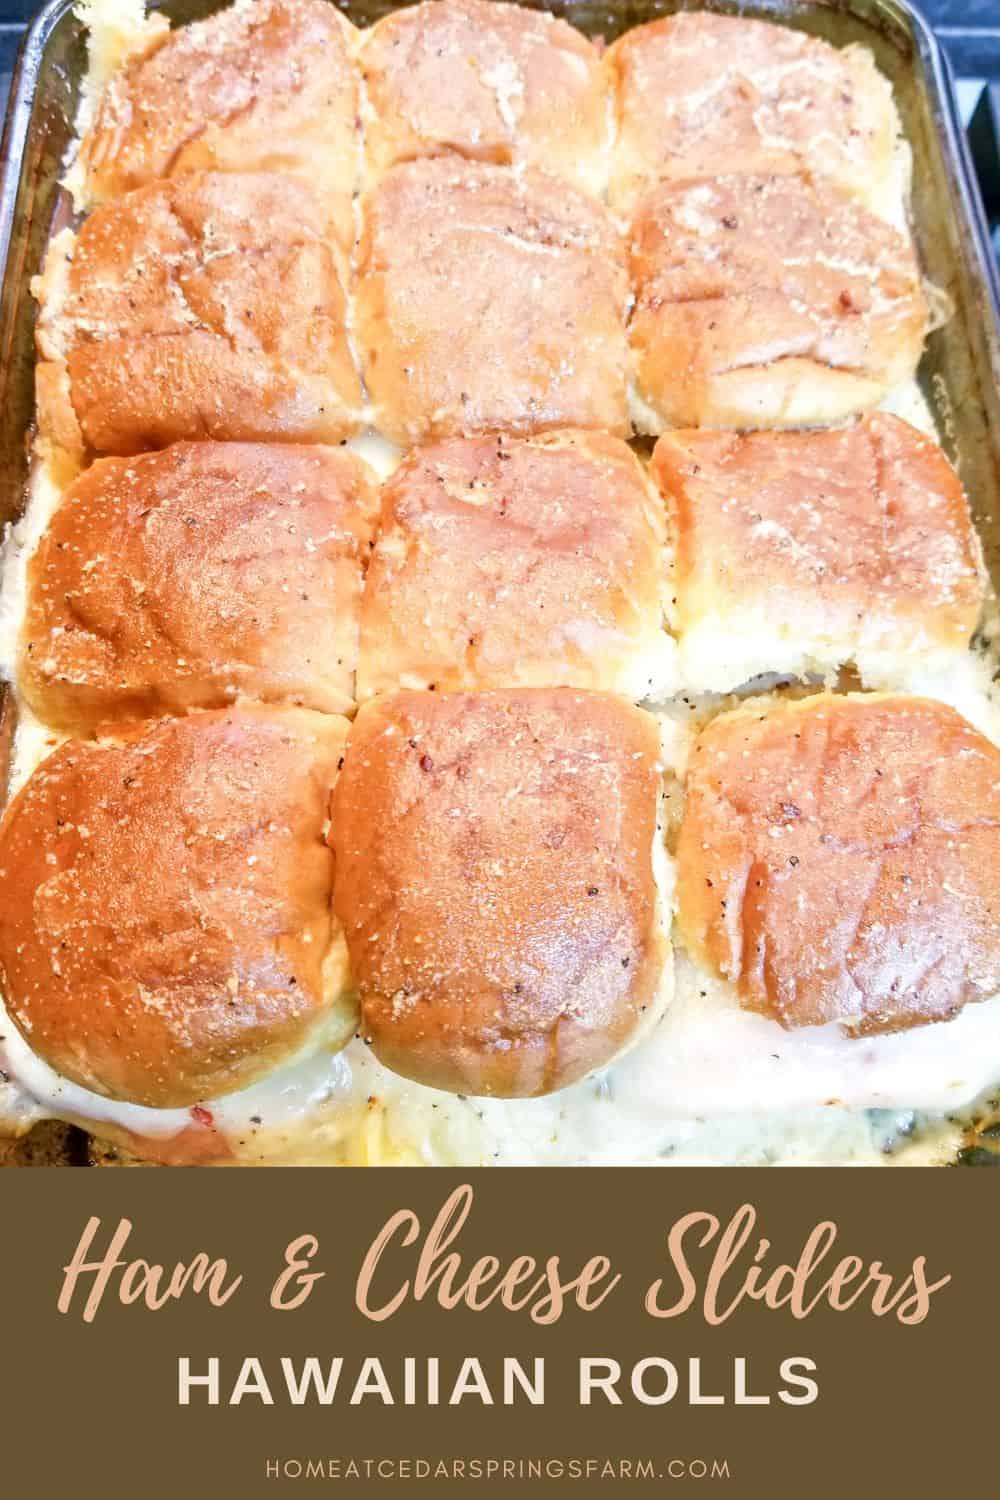 Picture of ready to eat ham and cheese sliders with text overlay.